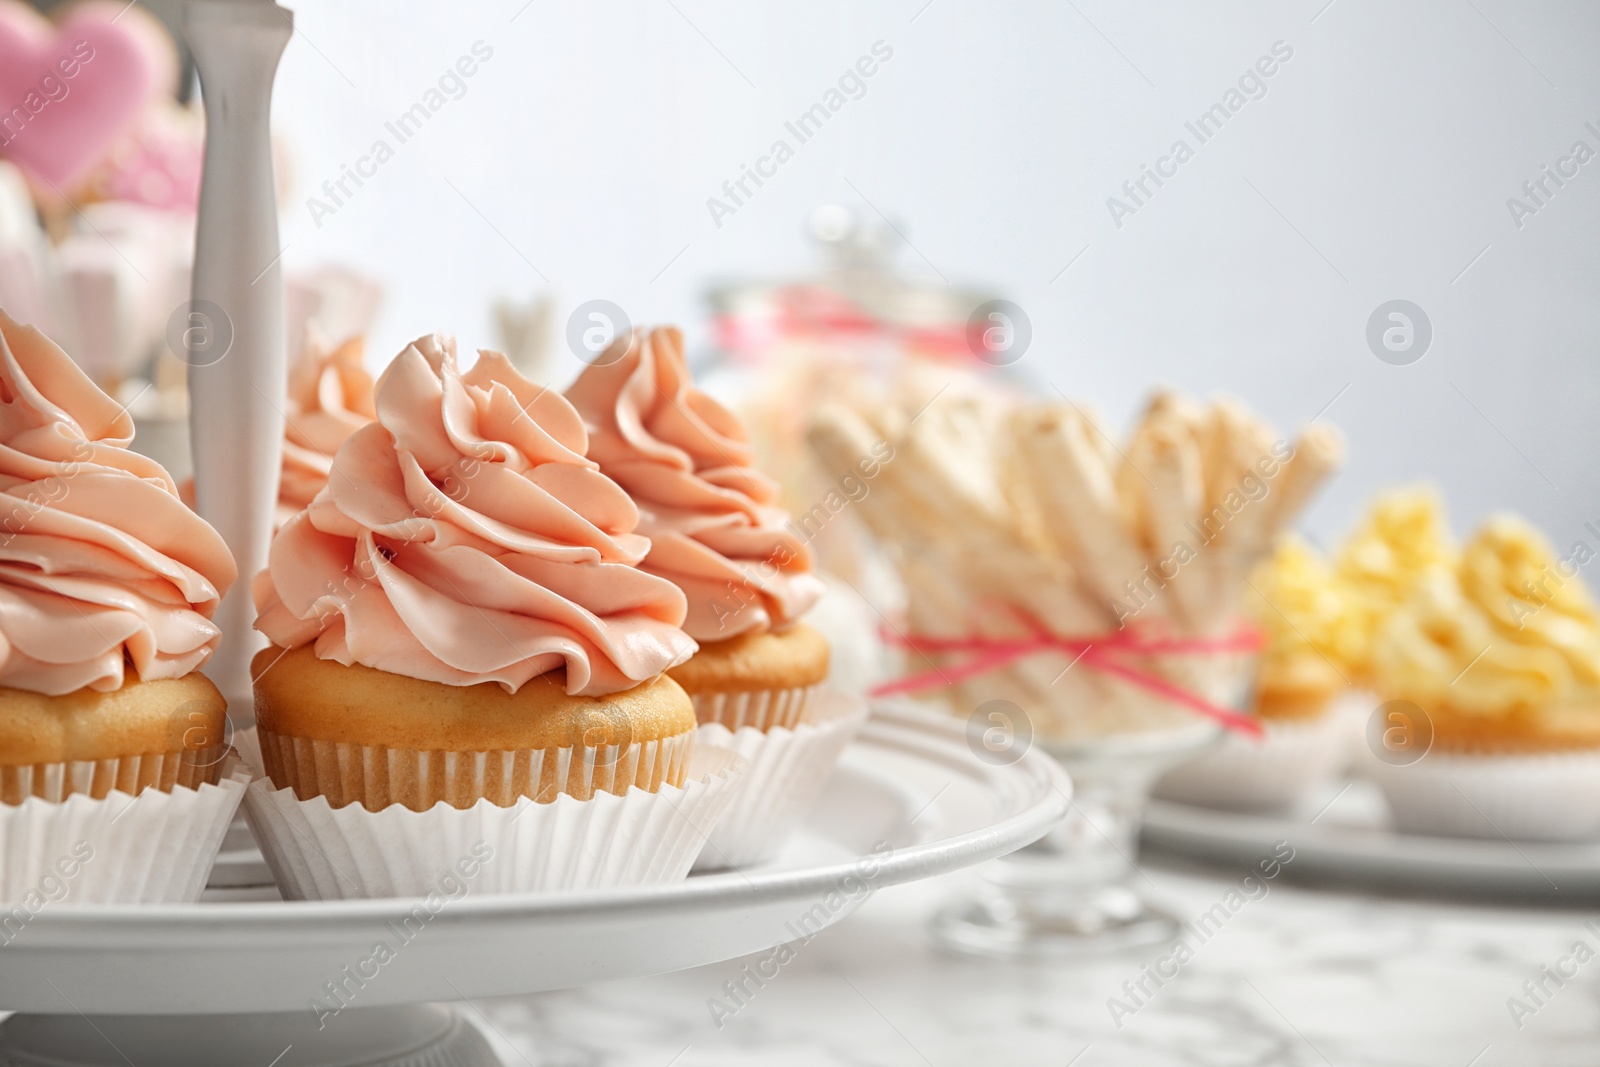 Photo of Stand with tasty cupcakes on table, space for text. Candy bar